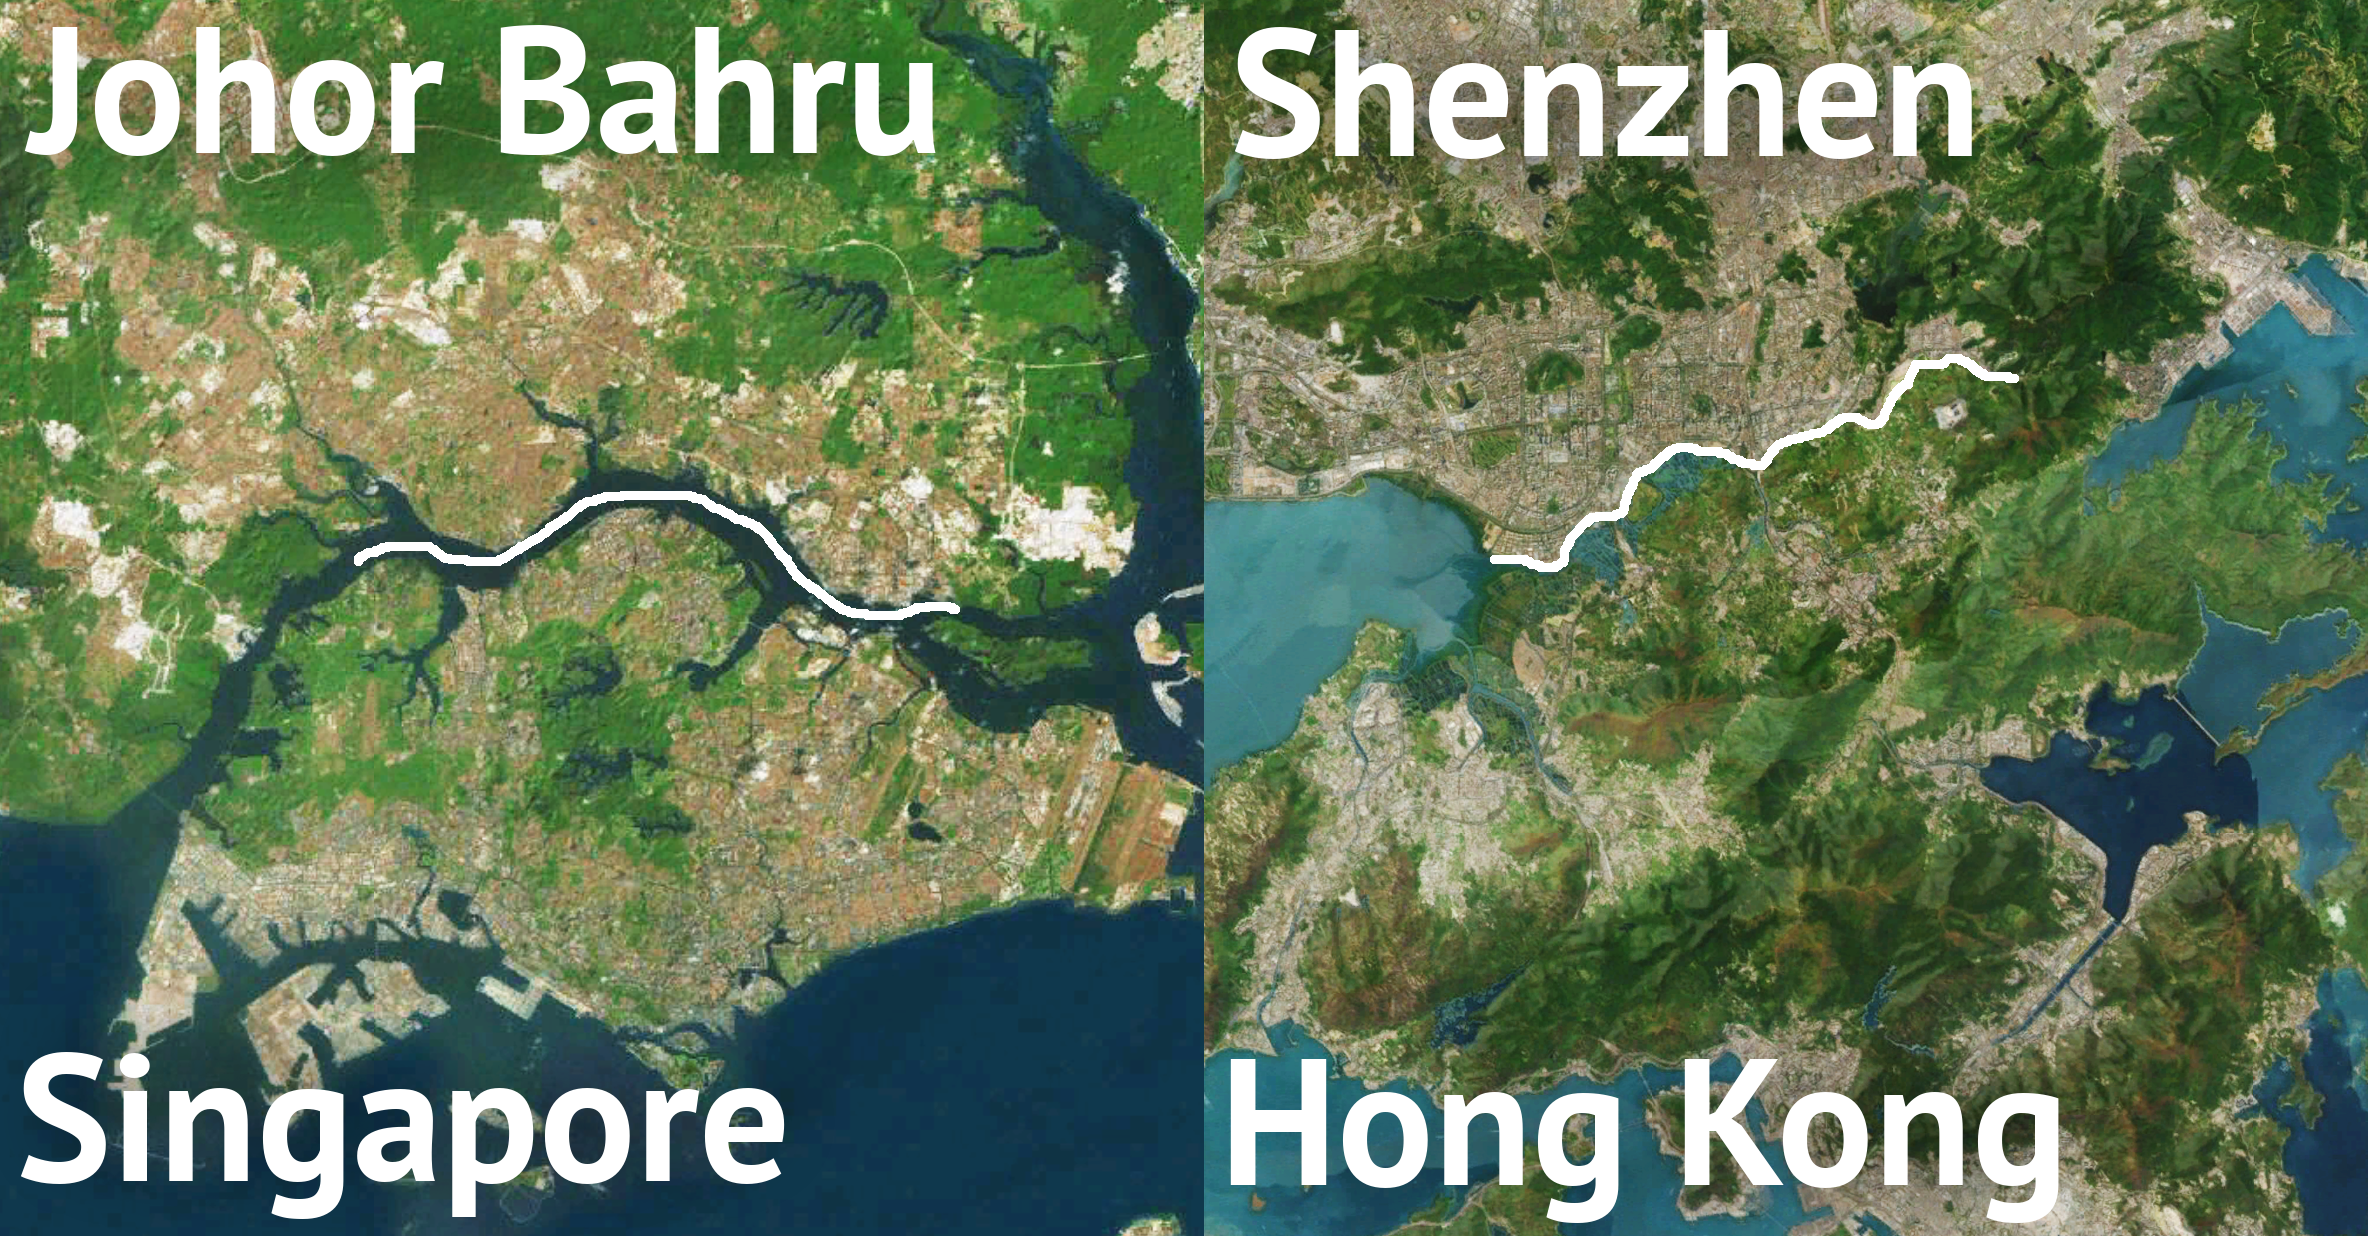 The cities of Johor and Shenzhen practically owe their existence to better-known Singapore and Hong Kong.